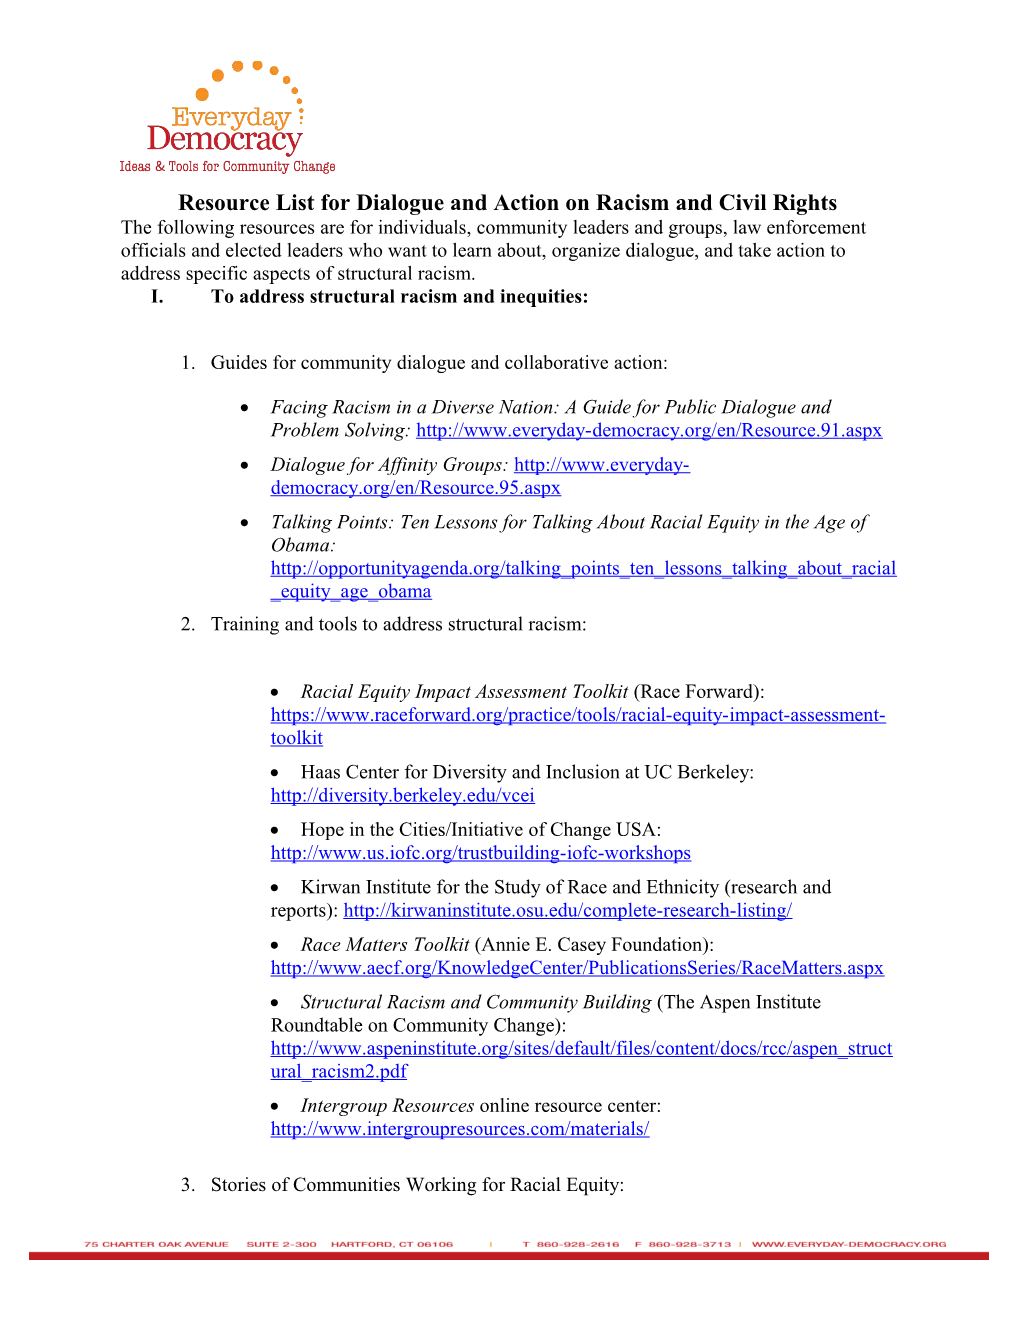 Resource List for Dialogue and Action on Racism and Civil Rights